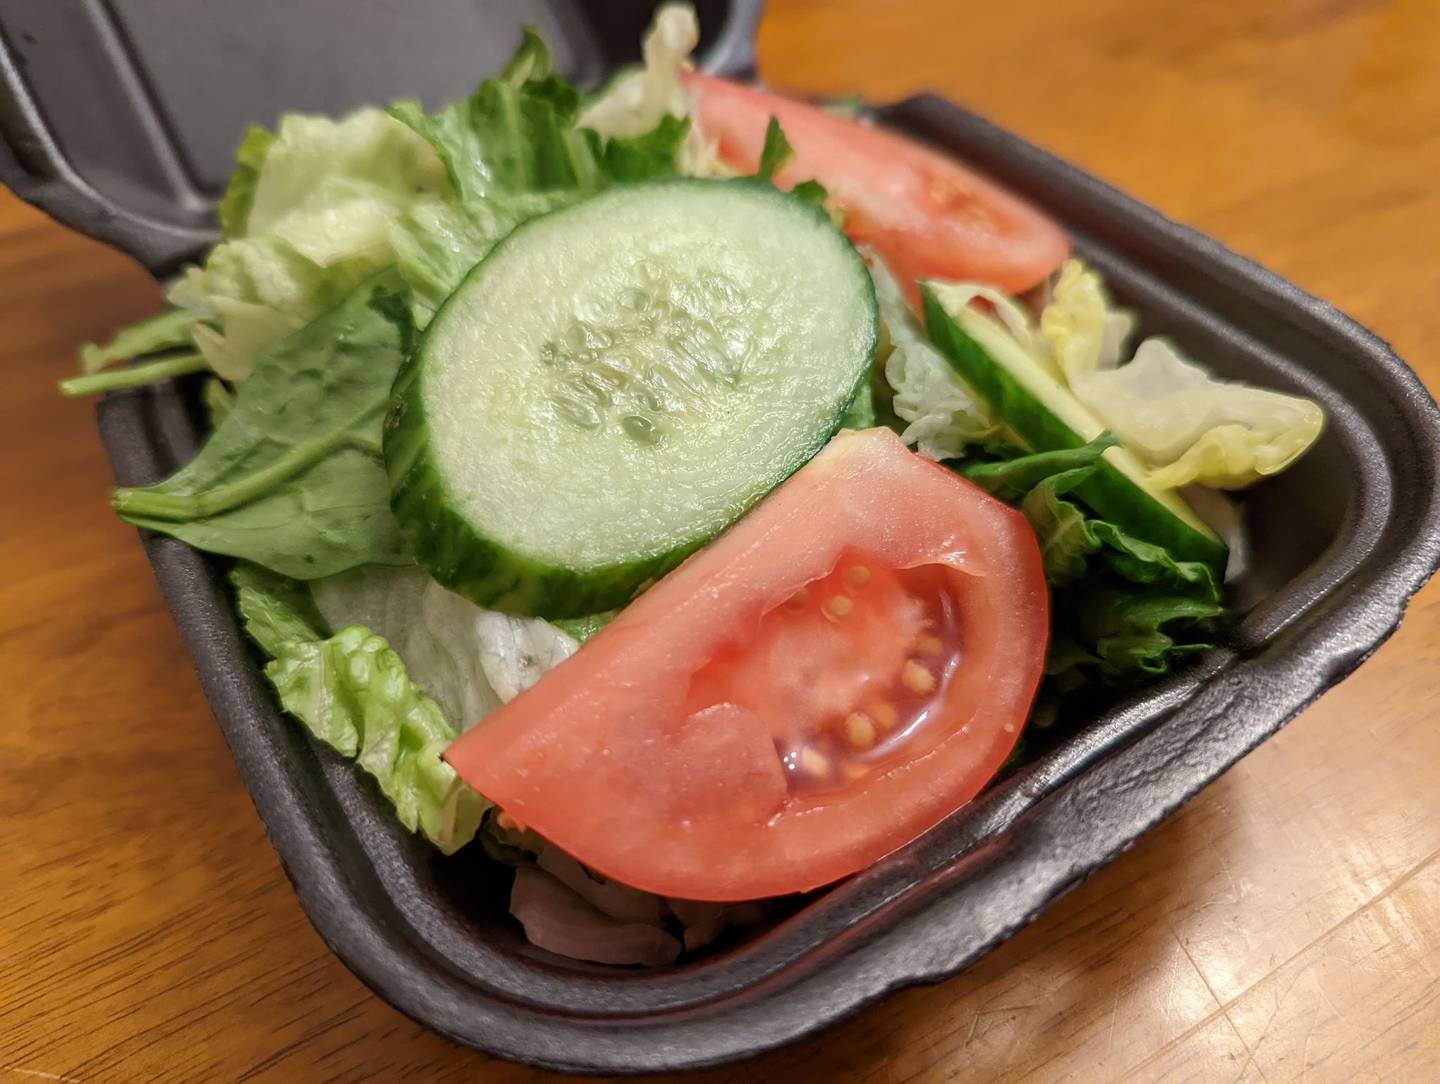 Pictured is a side salad from Happy Place Cafe in Shorewood.